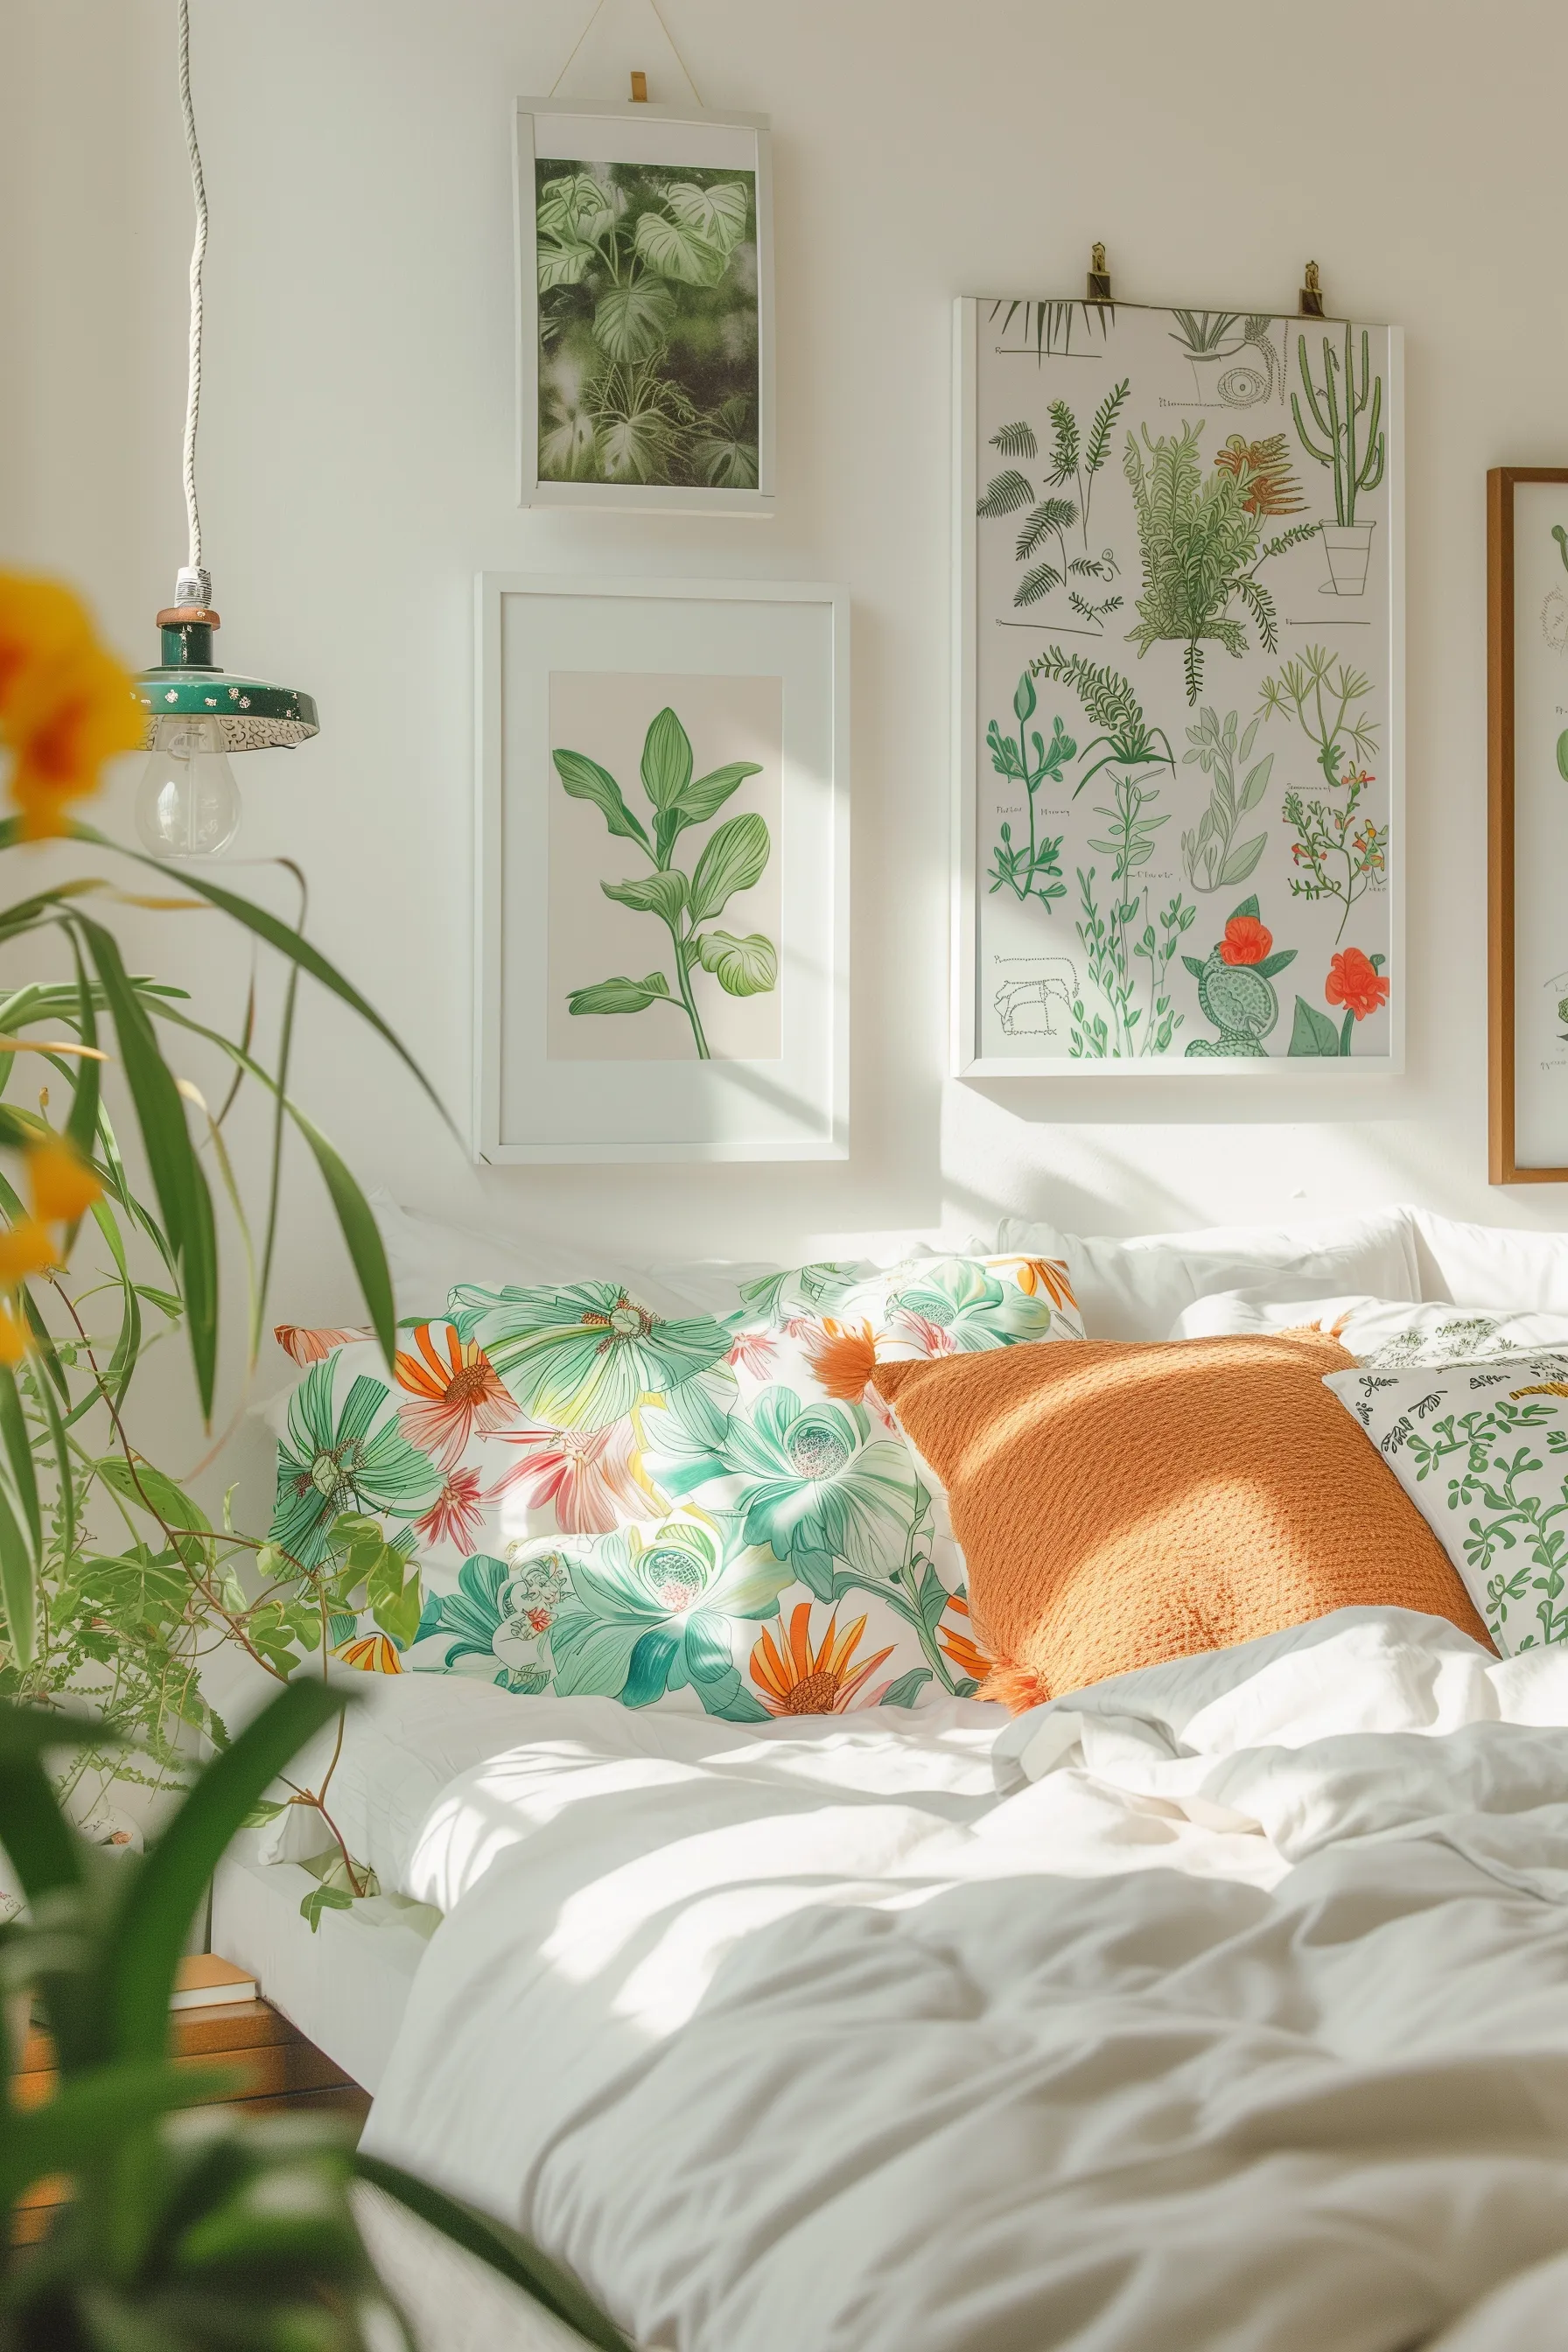 throw pillows on bed with plant artwork